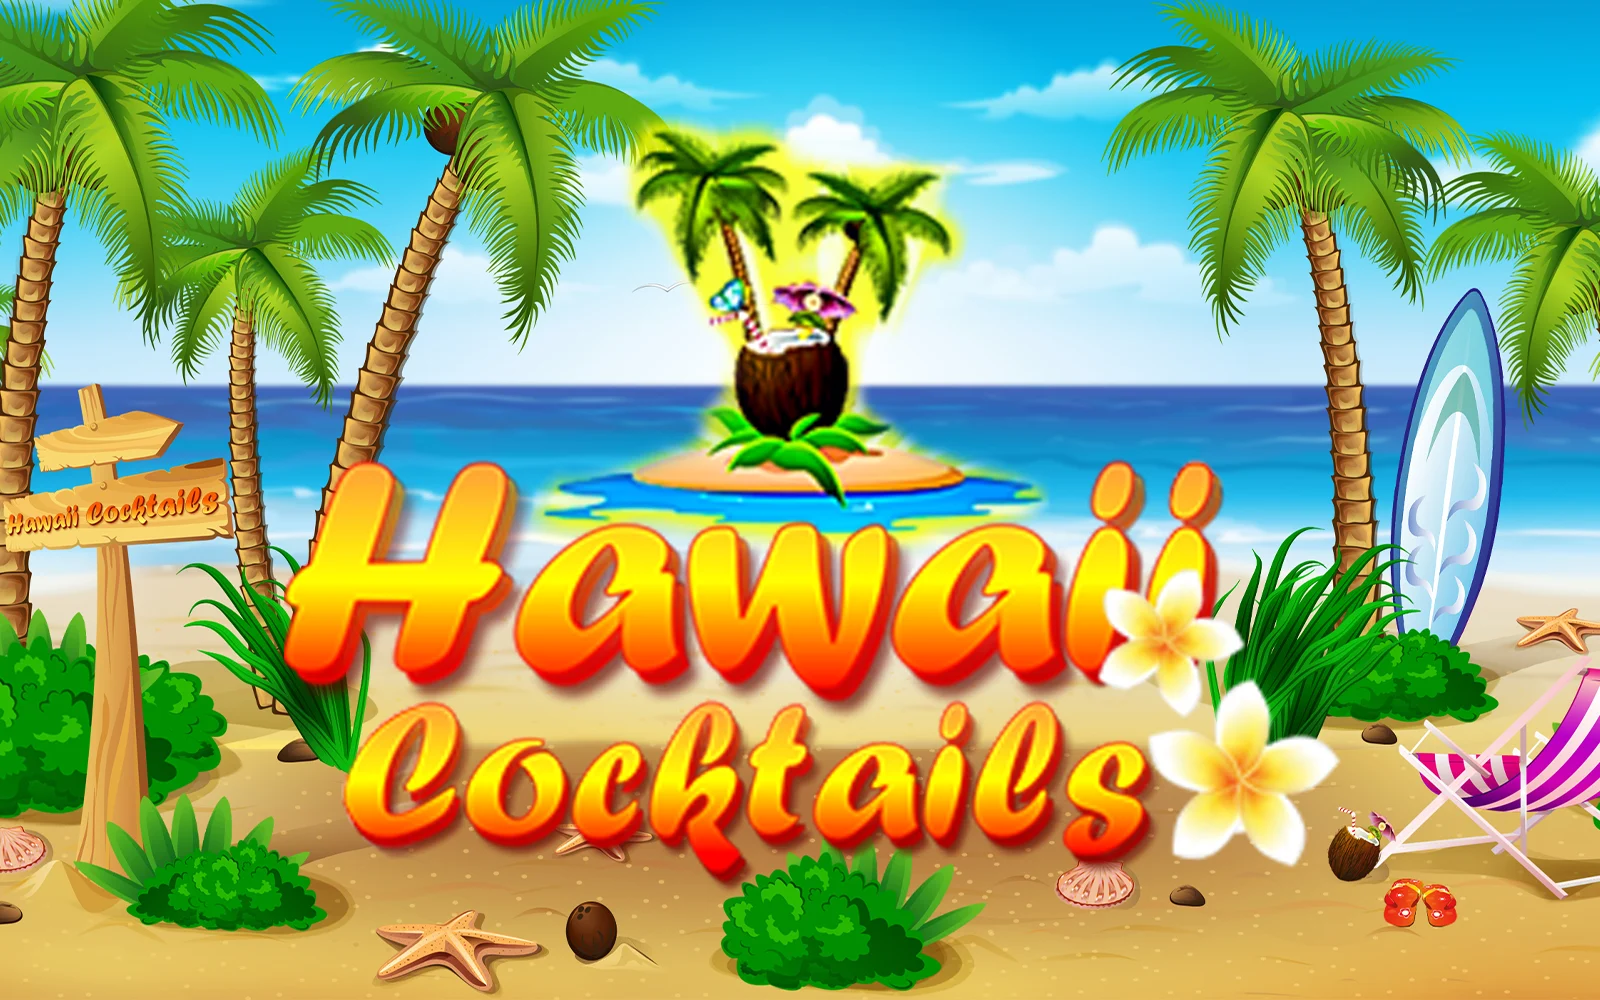 Play Hawaii Cocktails on Starcasino.be online casino